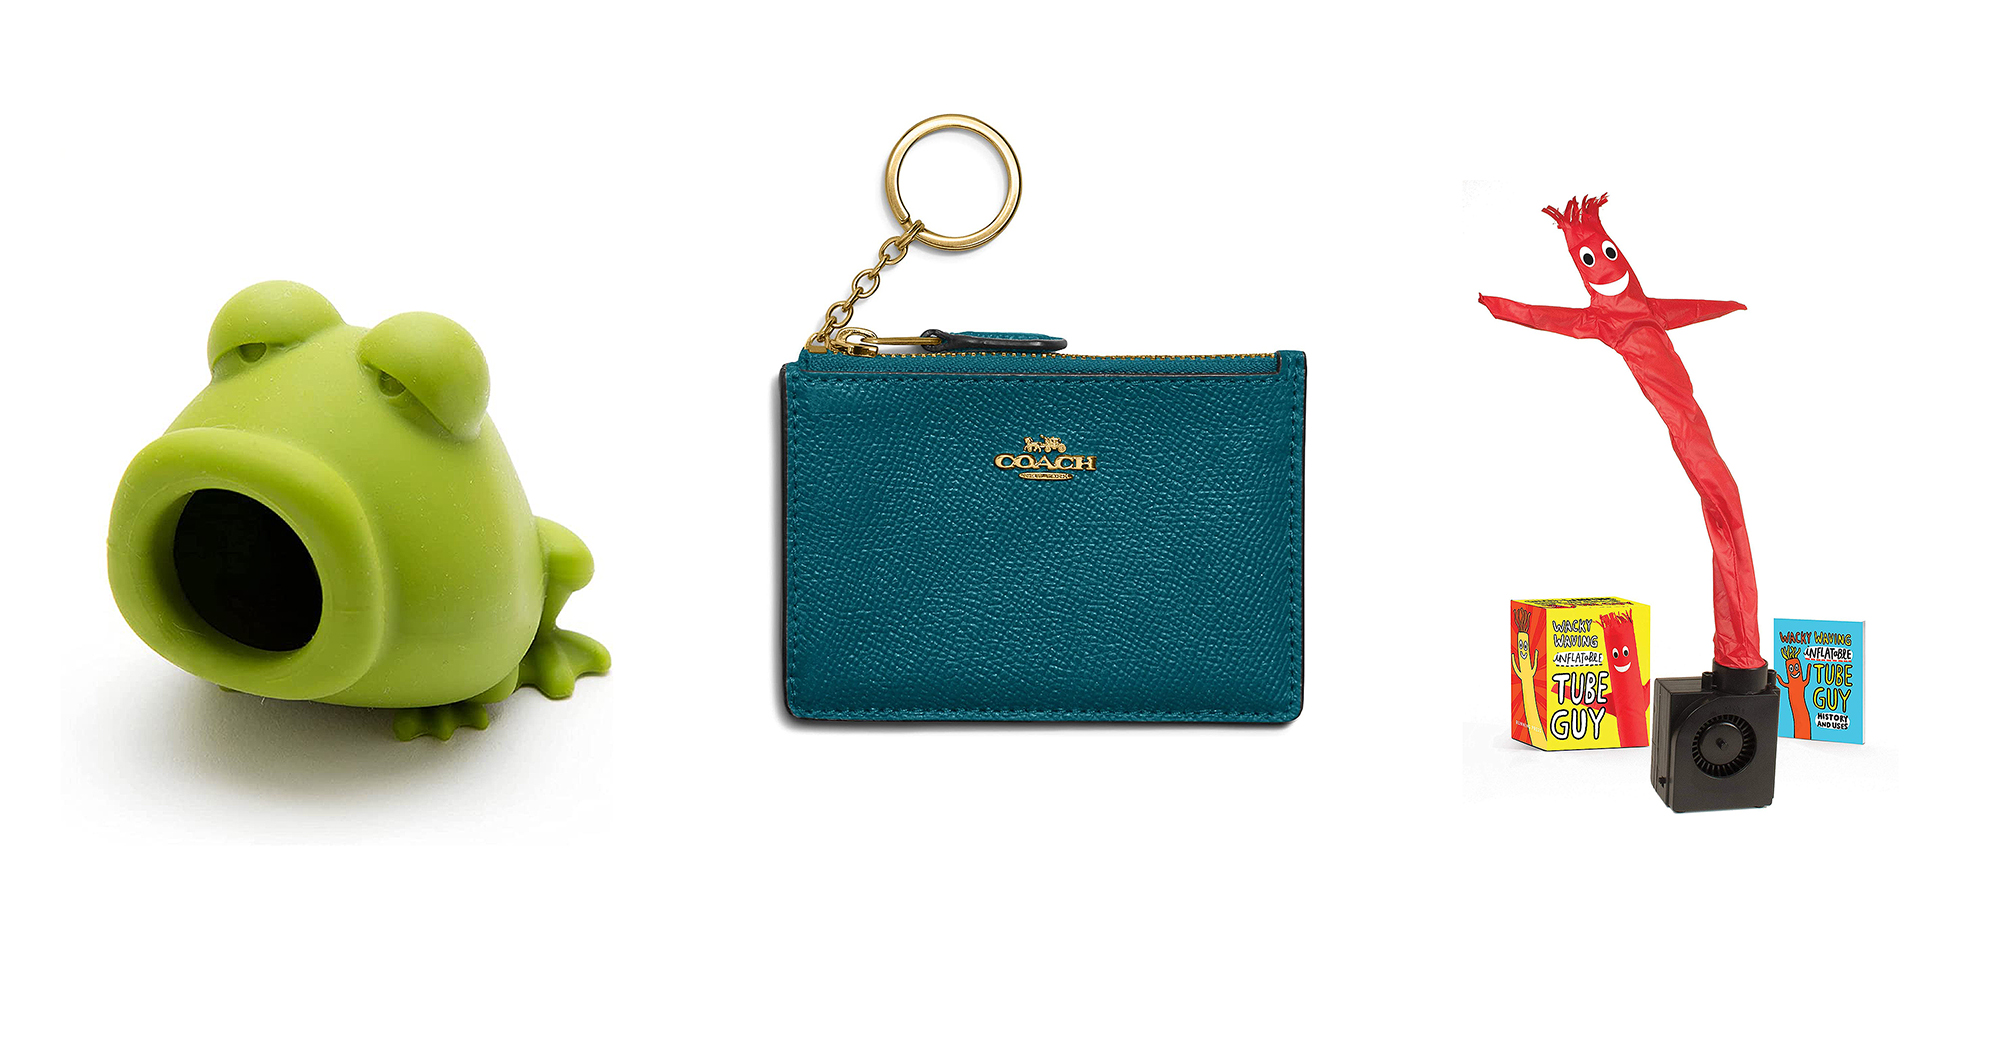 The Best Gifts for $50 and Under 2022: $50 Gifts for Her, Him